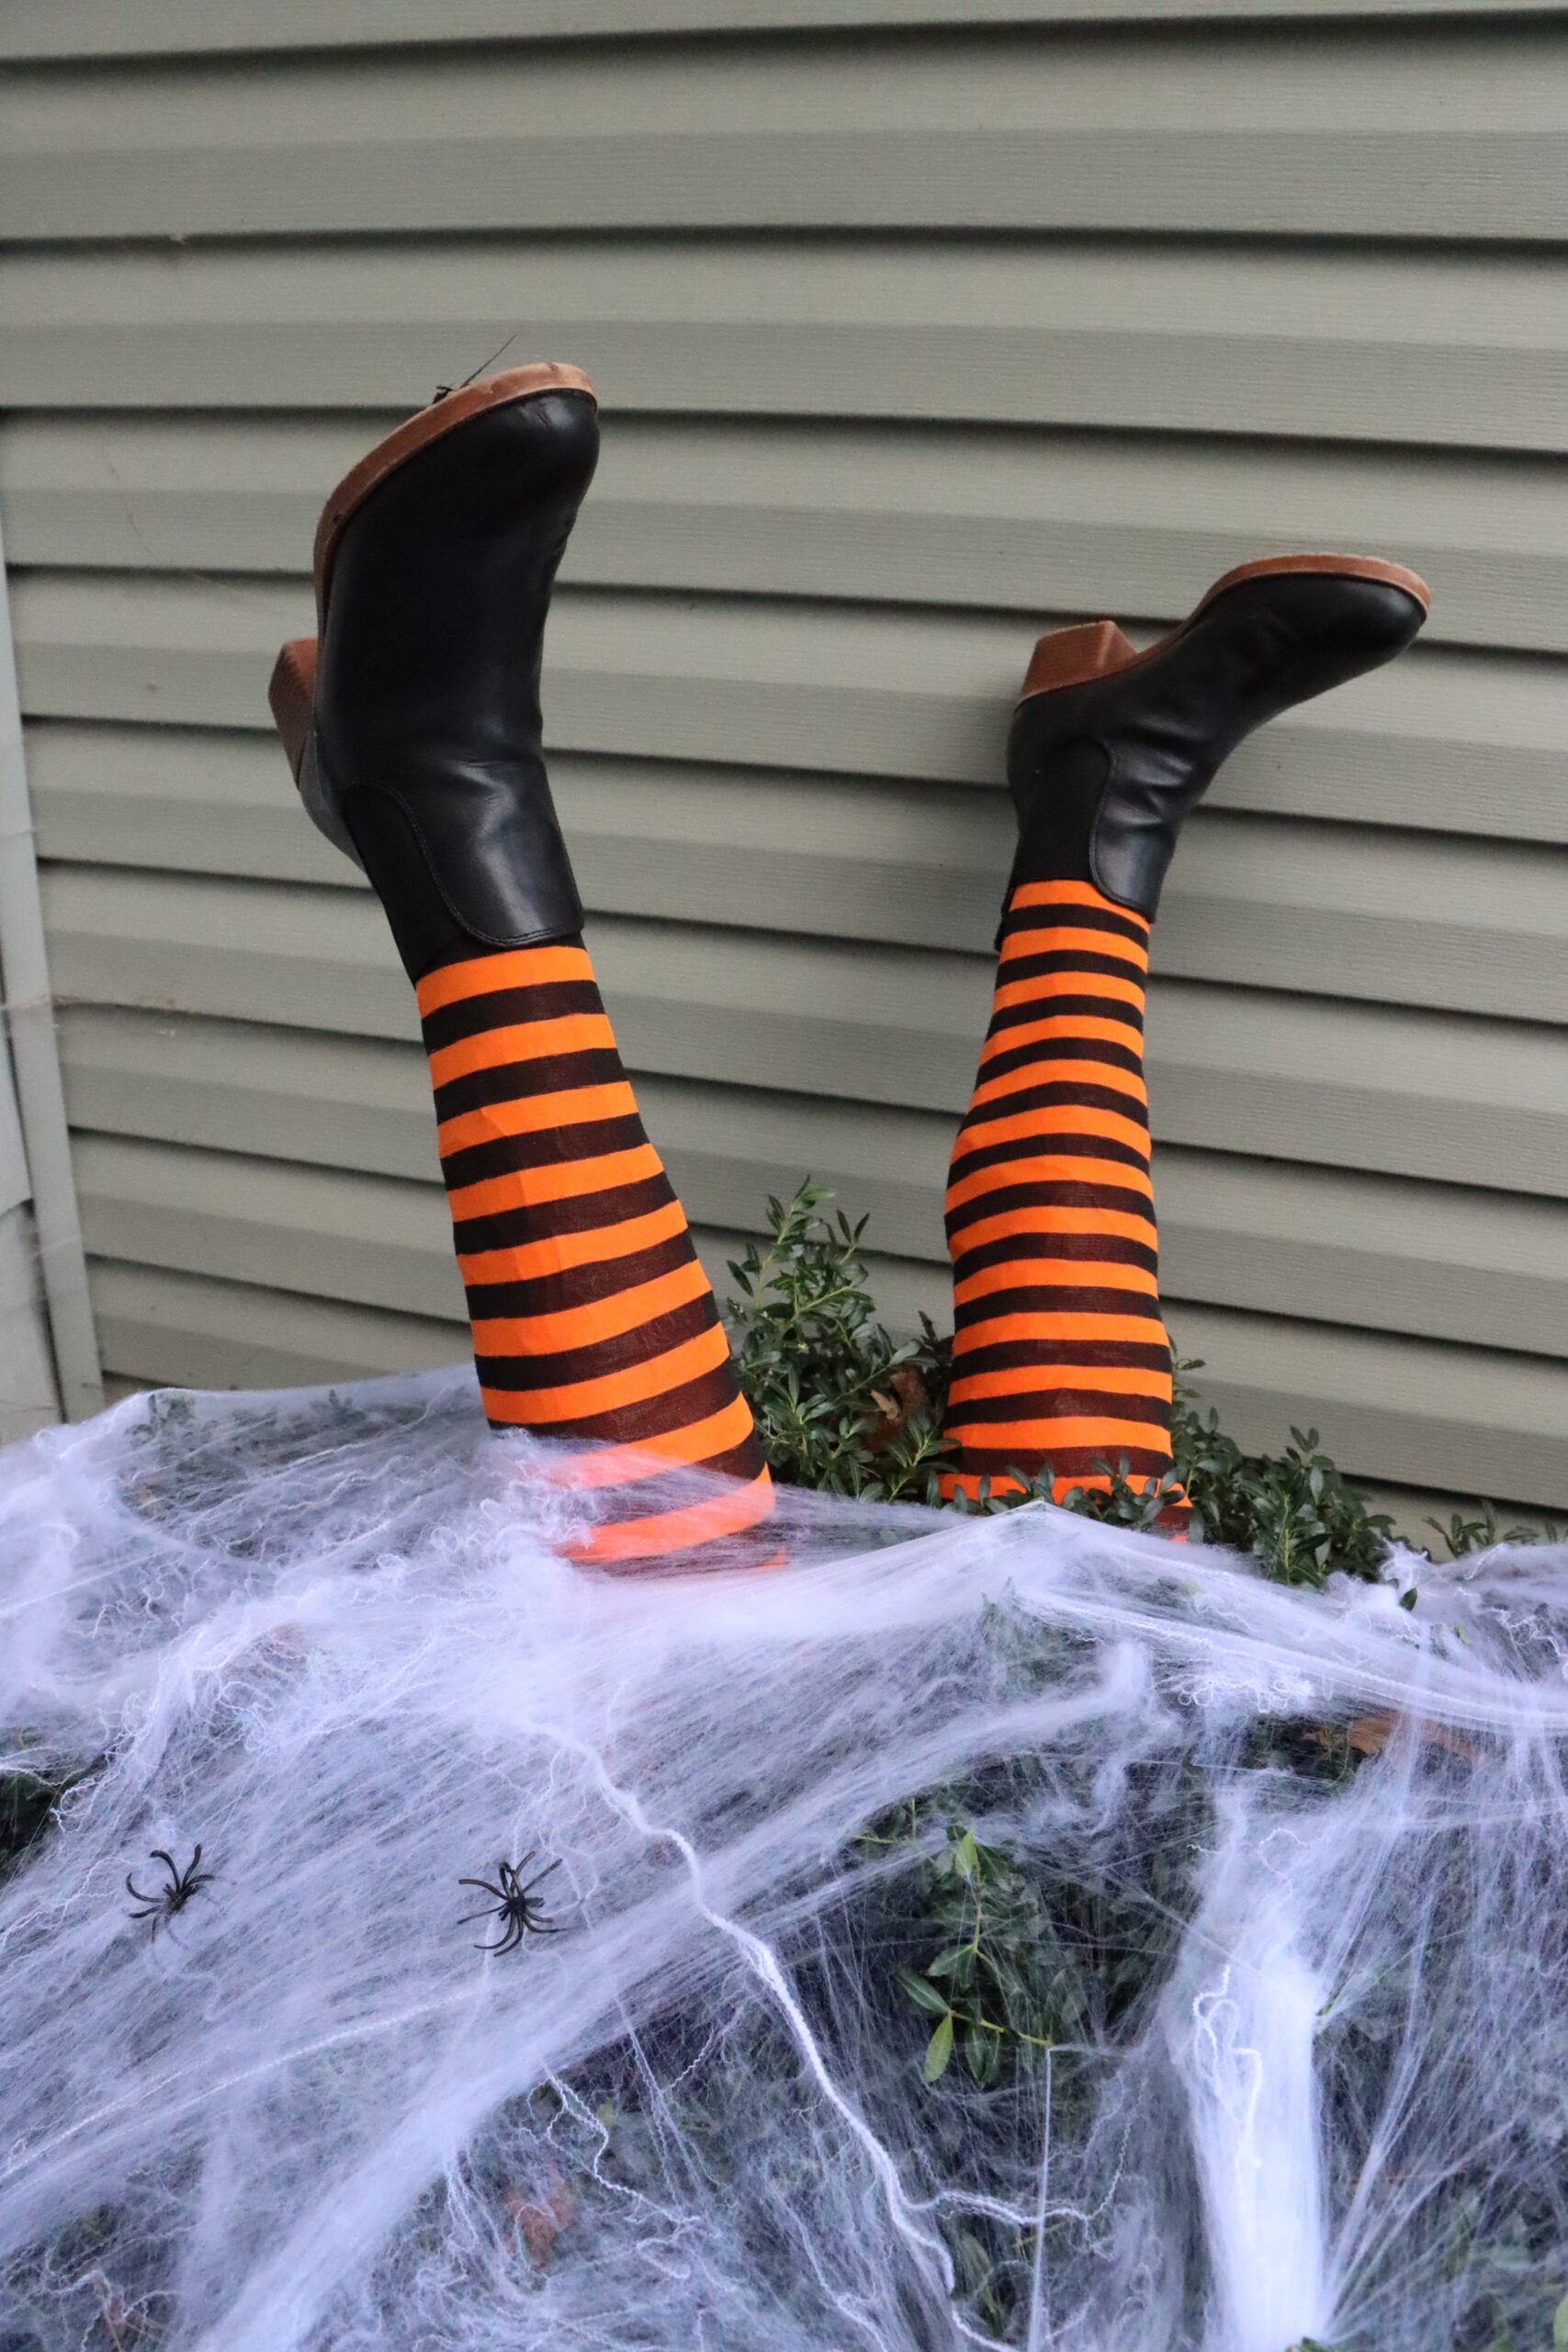 5 Best-Selling DIY Decorations Under $50 for an Unforgettable Halloween